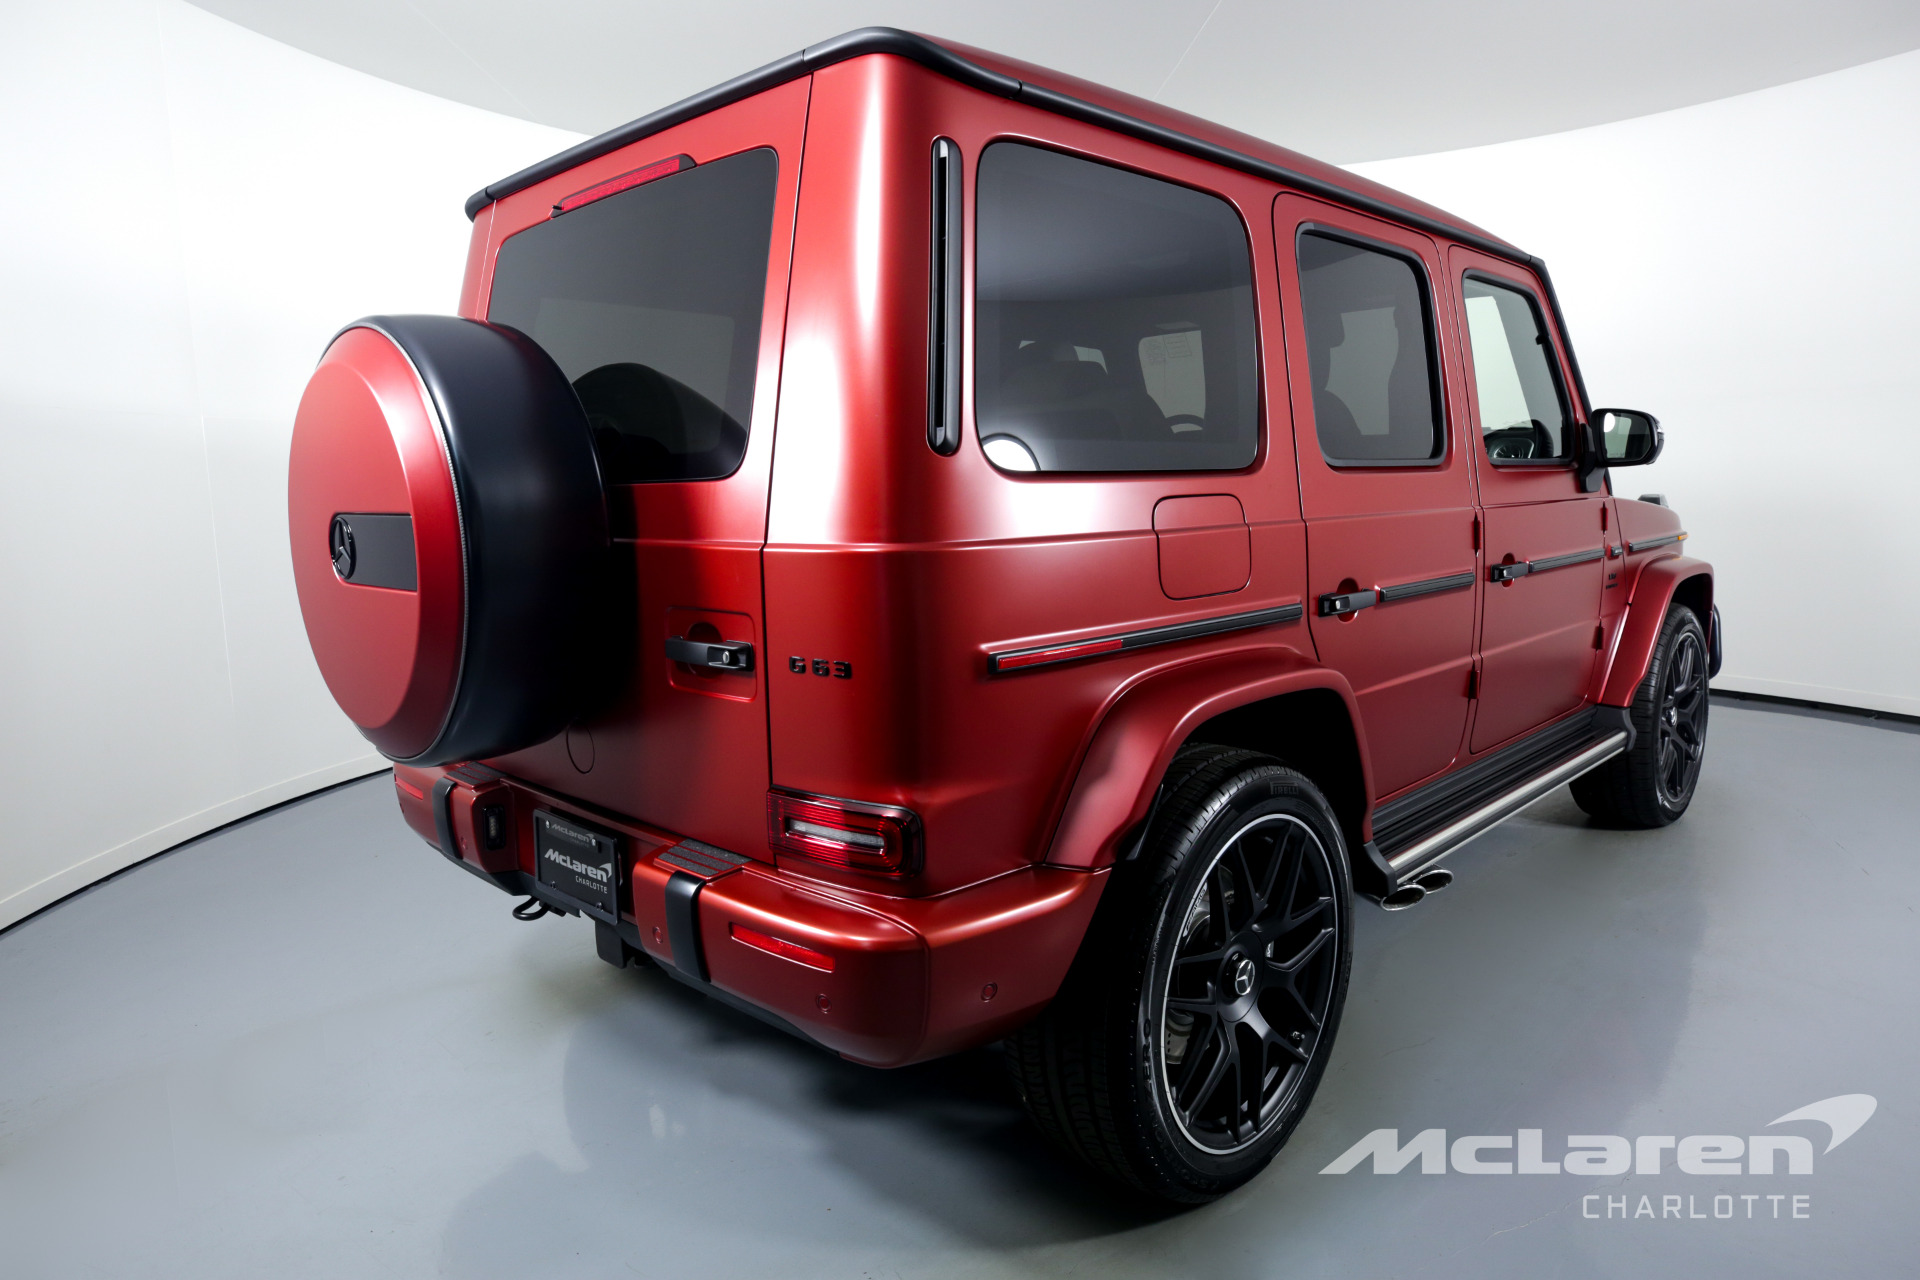 Used 21 Mercedes Benz G Class Amg G 63 For Sale 319 996 Mclaren Charlotte Stock